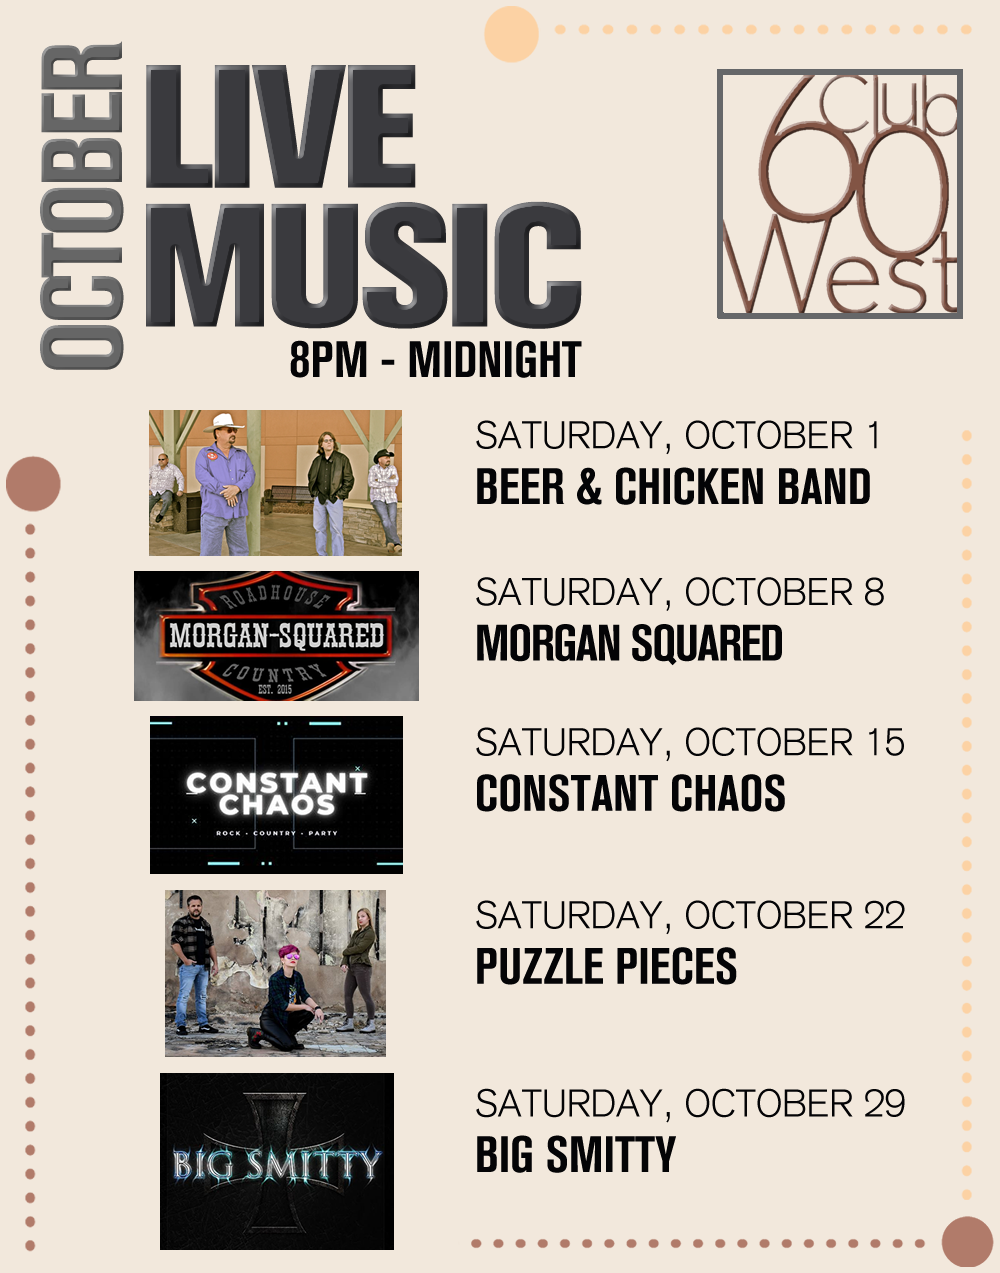 Club 60 West Live Entertainment- October 2022